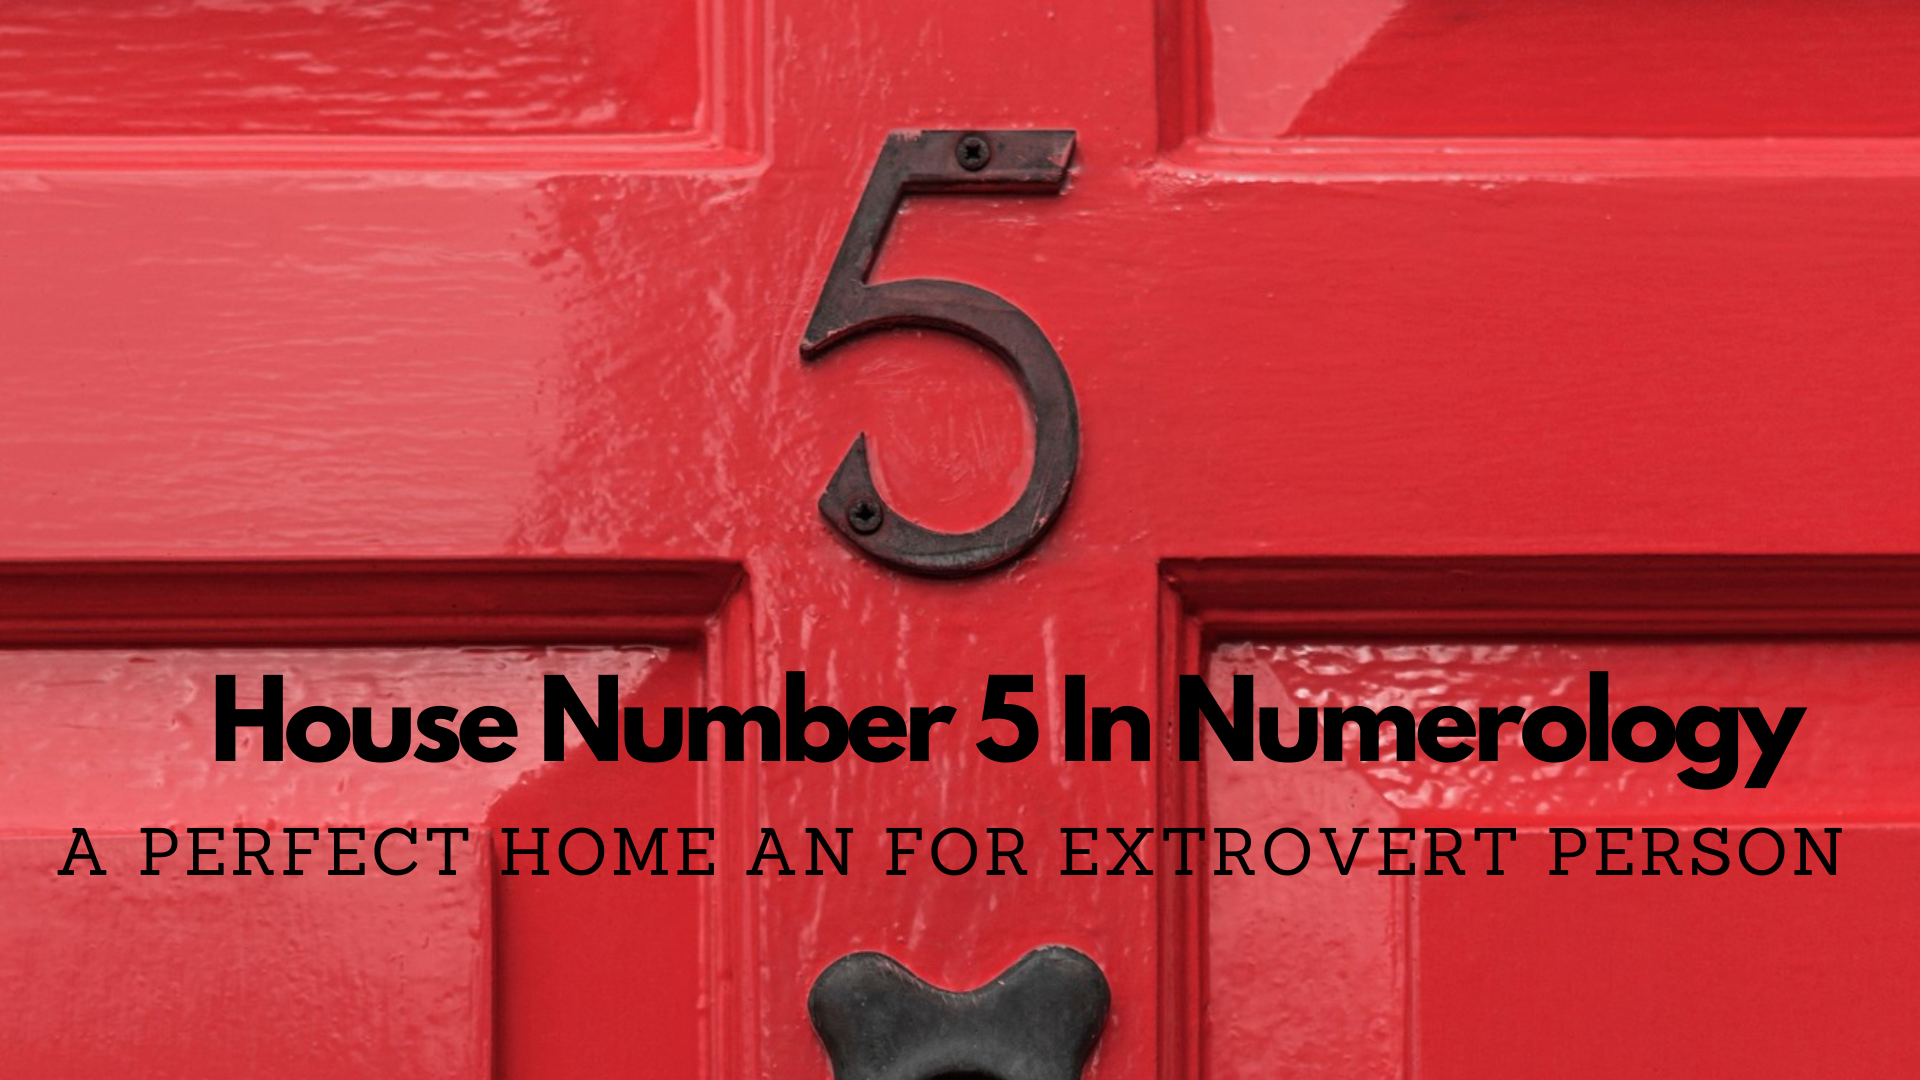 House Number 5 In Numerology - A Perfect Home An For Extrovert Person